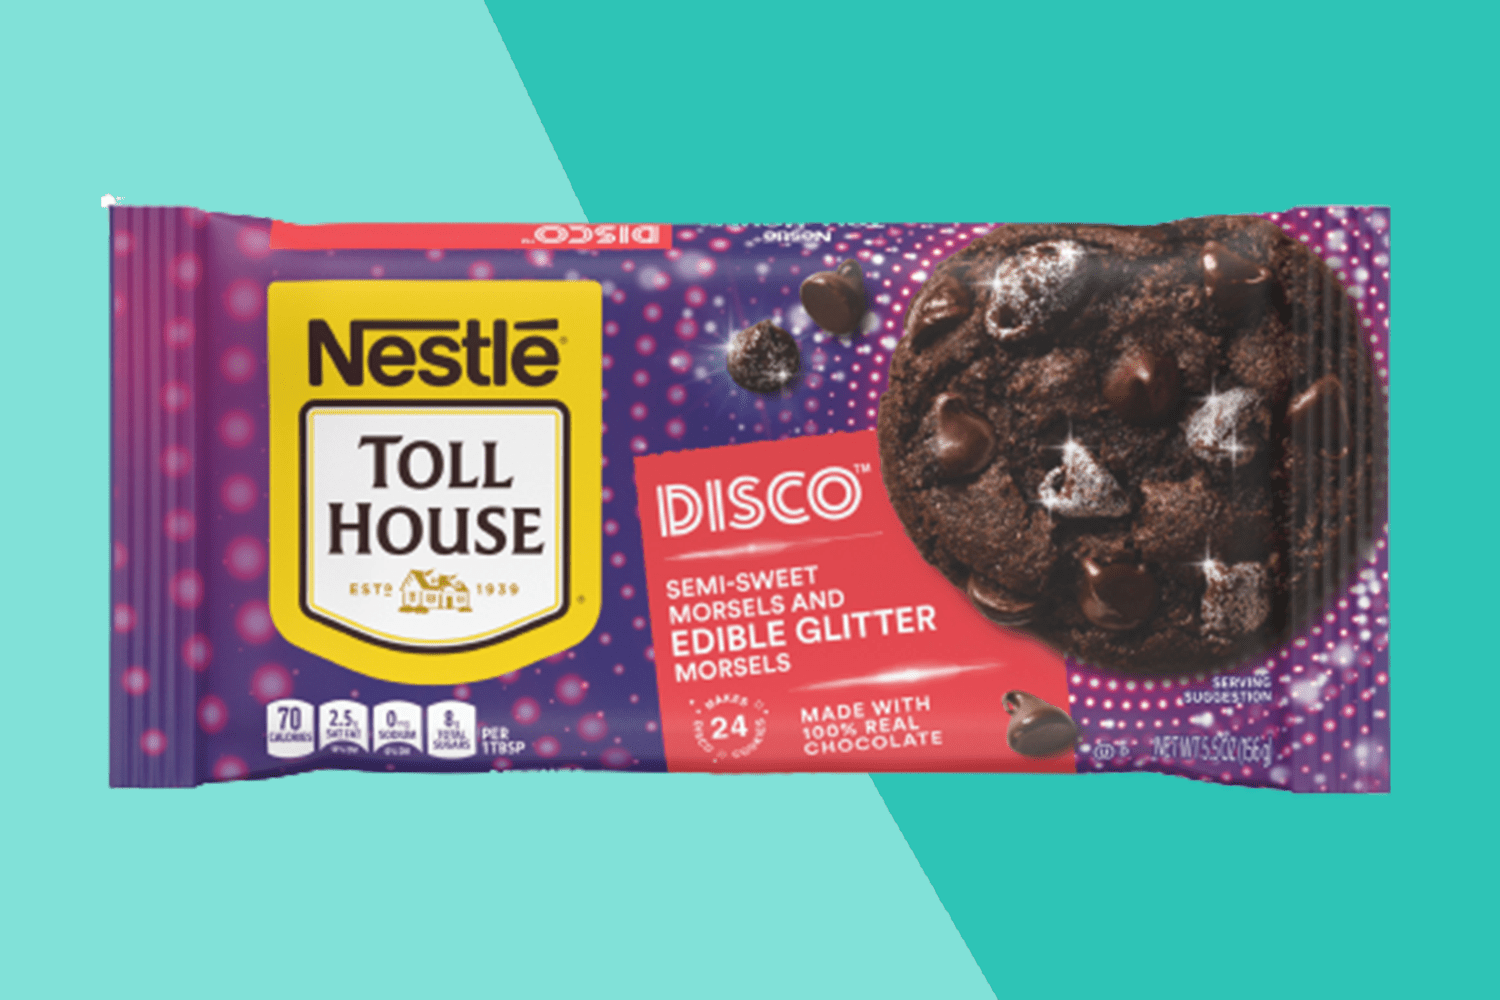 nestle toll house disco morsels with edible glitter